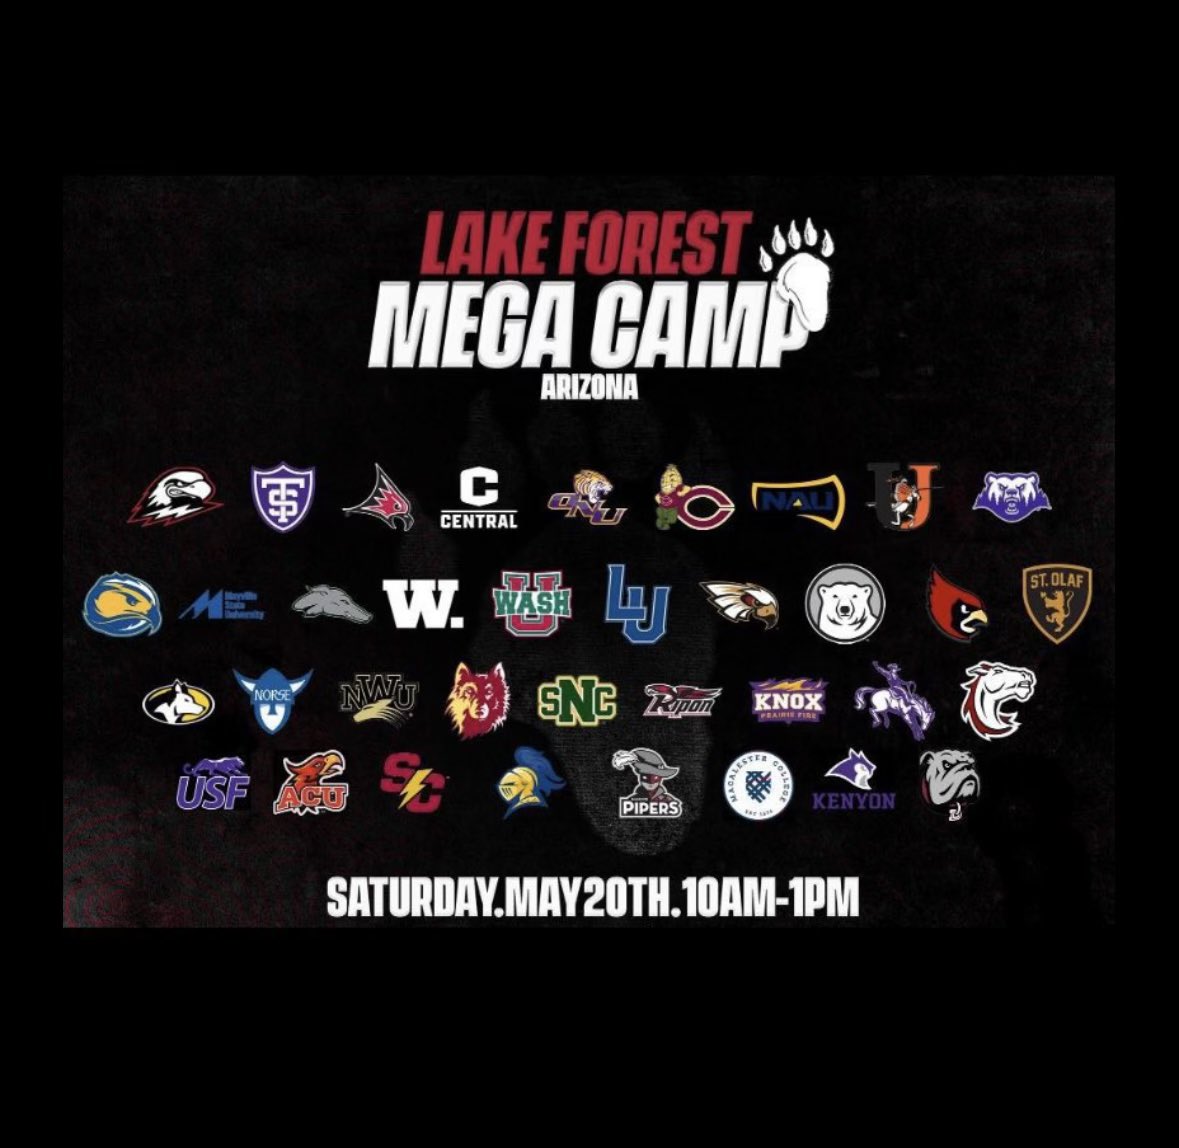 I am excited to compete and learn at the Lake Forest Mega Camp this weekend. @CoachPerrone @MyRecruits_ @LibertyFBLions @LFC_FOOTBALL @coachthomasfb #brachialplexuspalsy #erbspalsy #adaptiveathlete @sweetfeettrain1 @SweetFeetElite